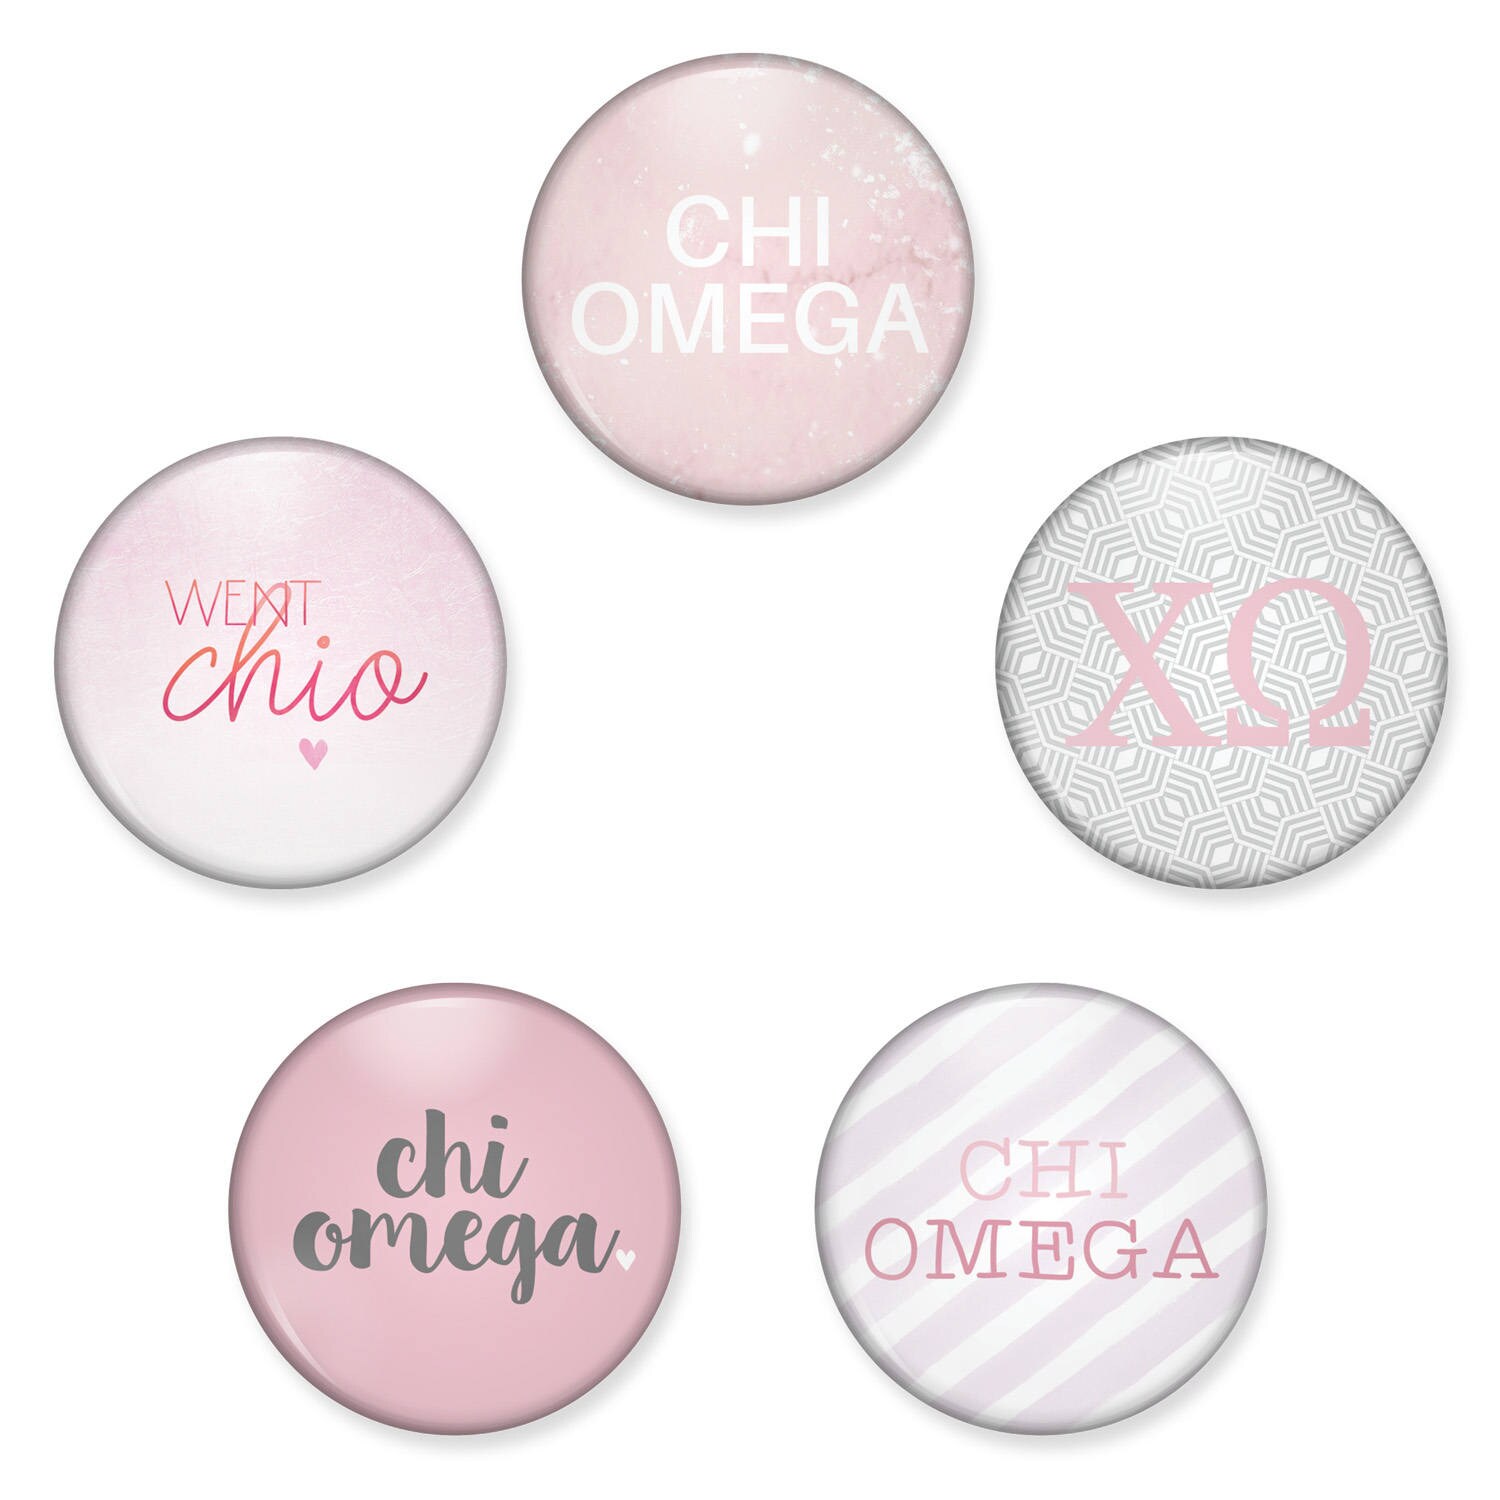 Chi Omega Button Set, Pin Back Buttons, Chio Sorority Pack, Magnet Xo Magnets, Bid Day Gifts